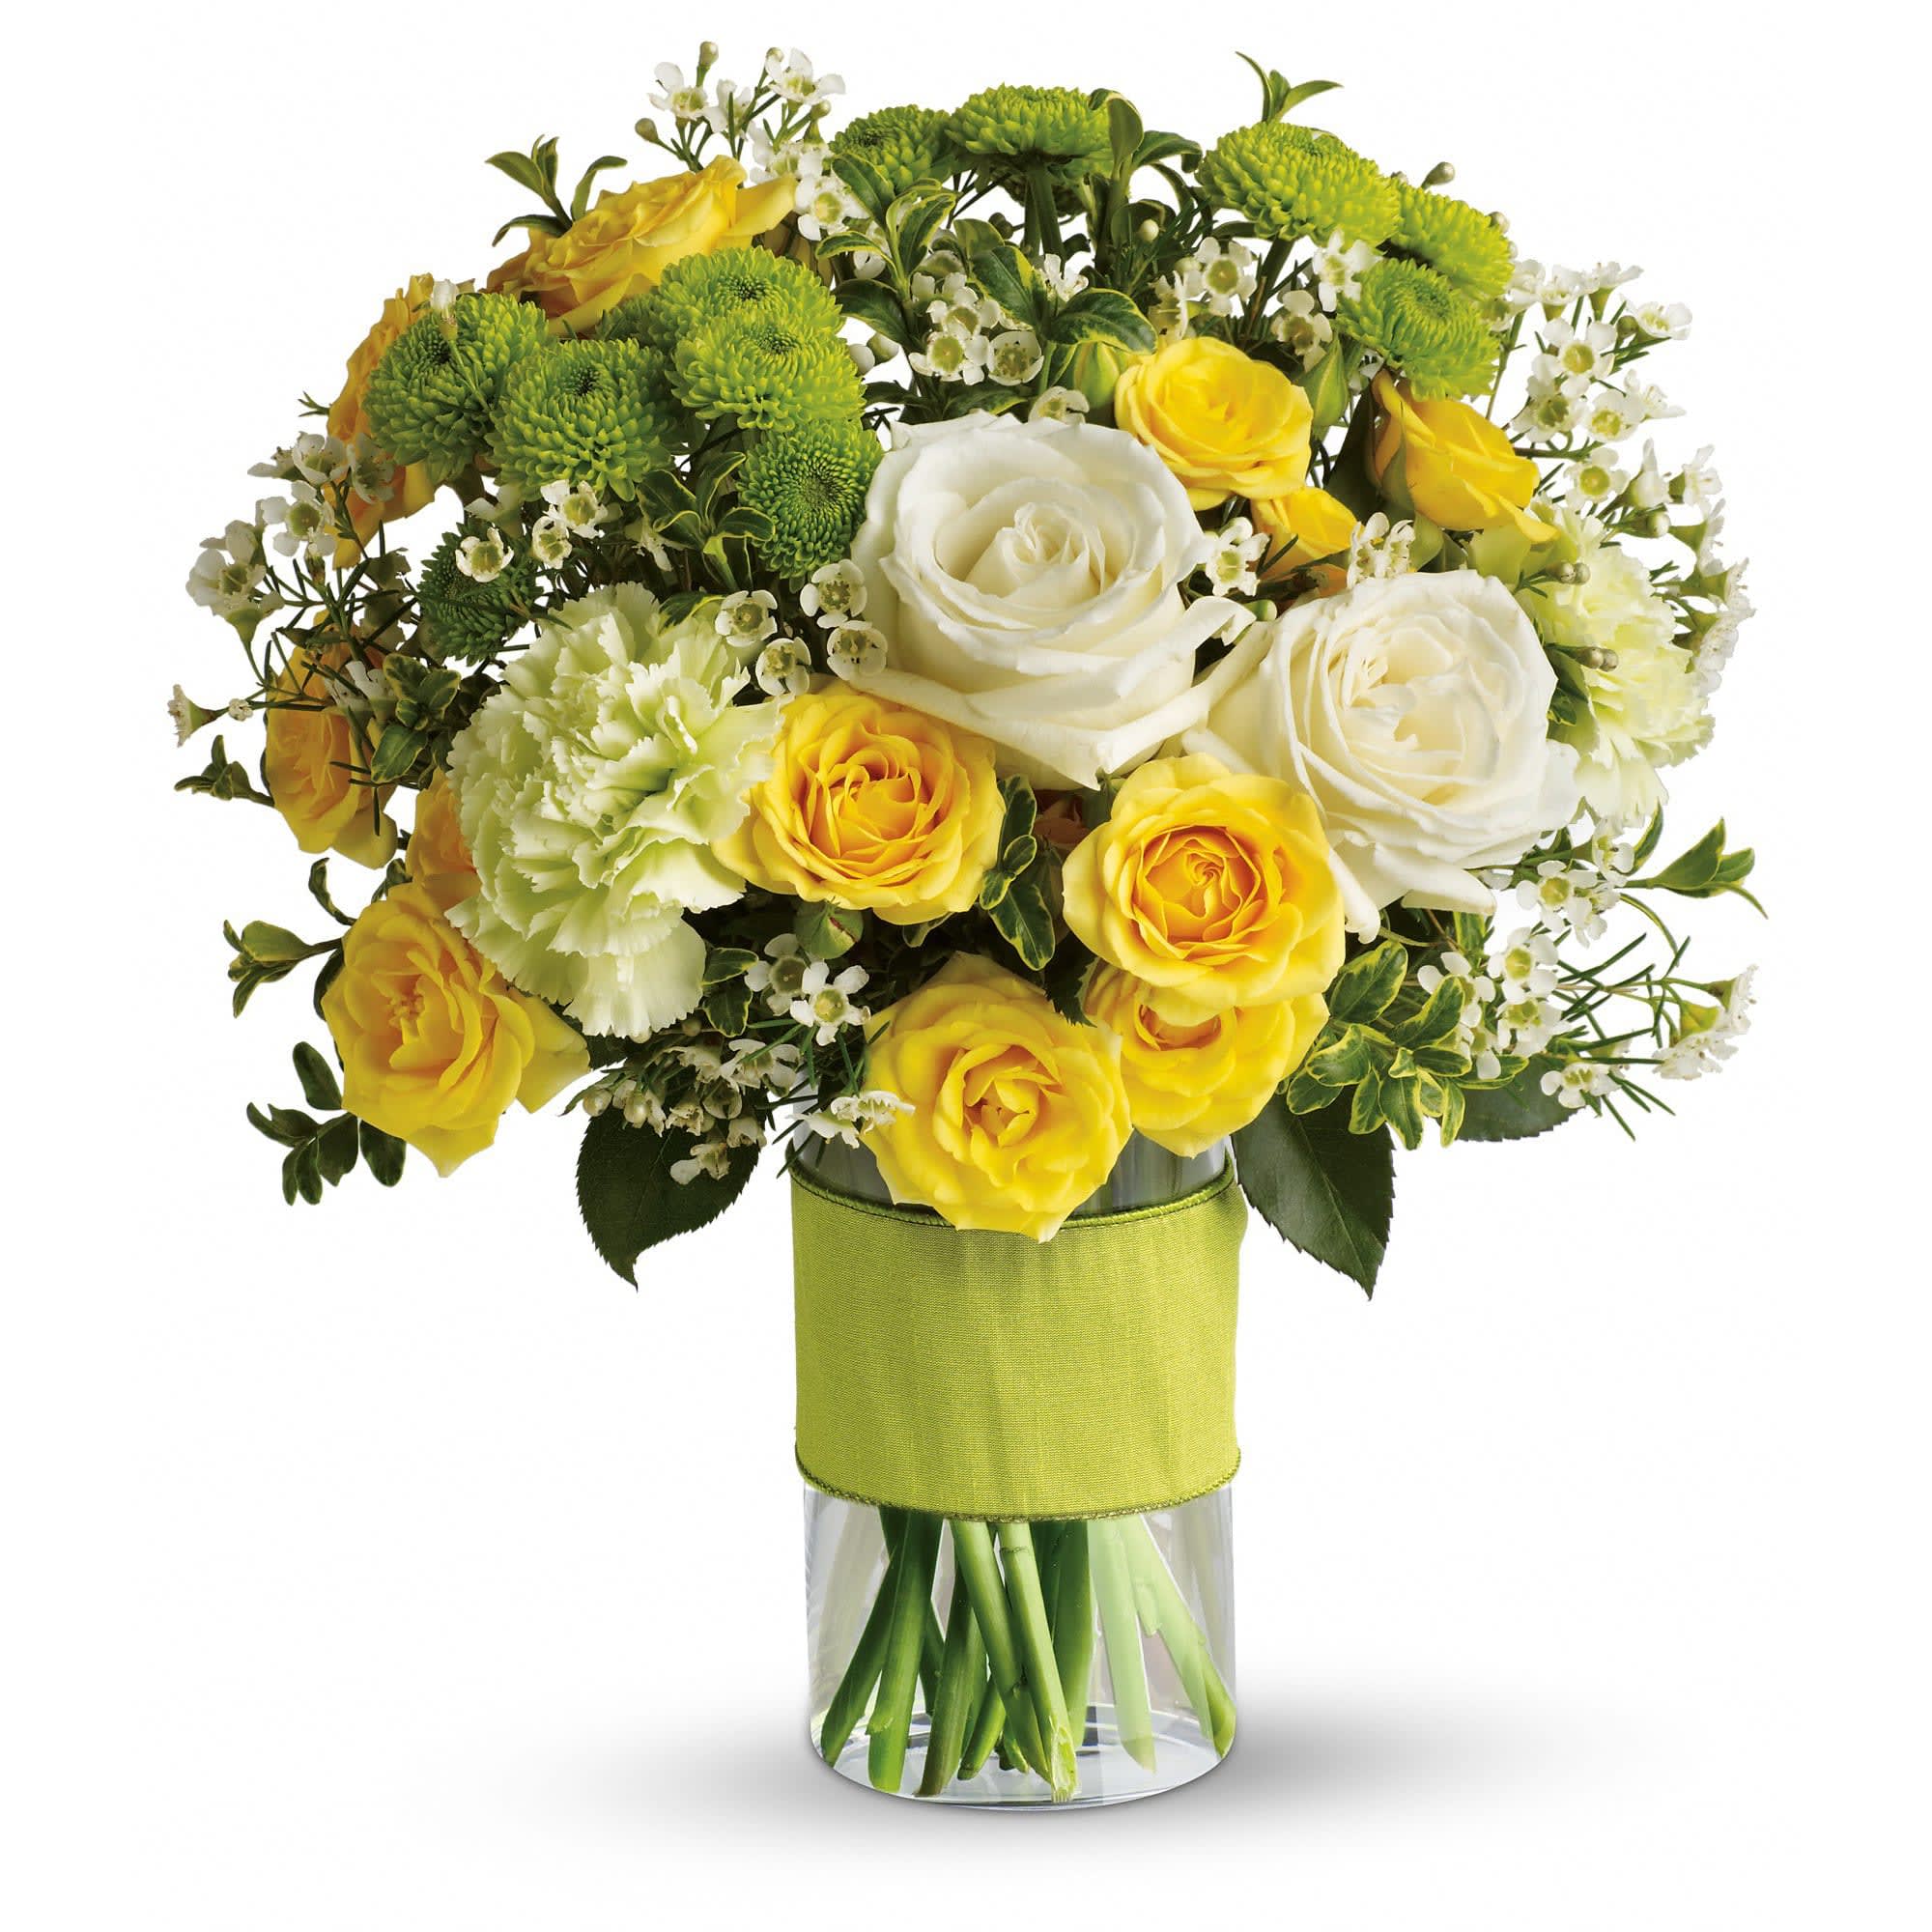 Your Sweet Smile by Teleflora - You could call or email that special someone, but why not put your feelings into flowers? She'll love this elegant array of white and yellow roses and other favorites in a stylish cylinder vase. She'll want to thank you in person.  